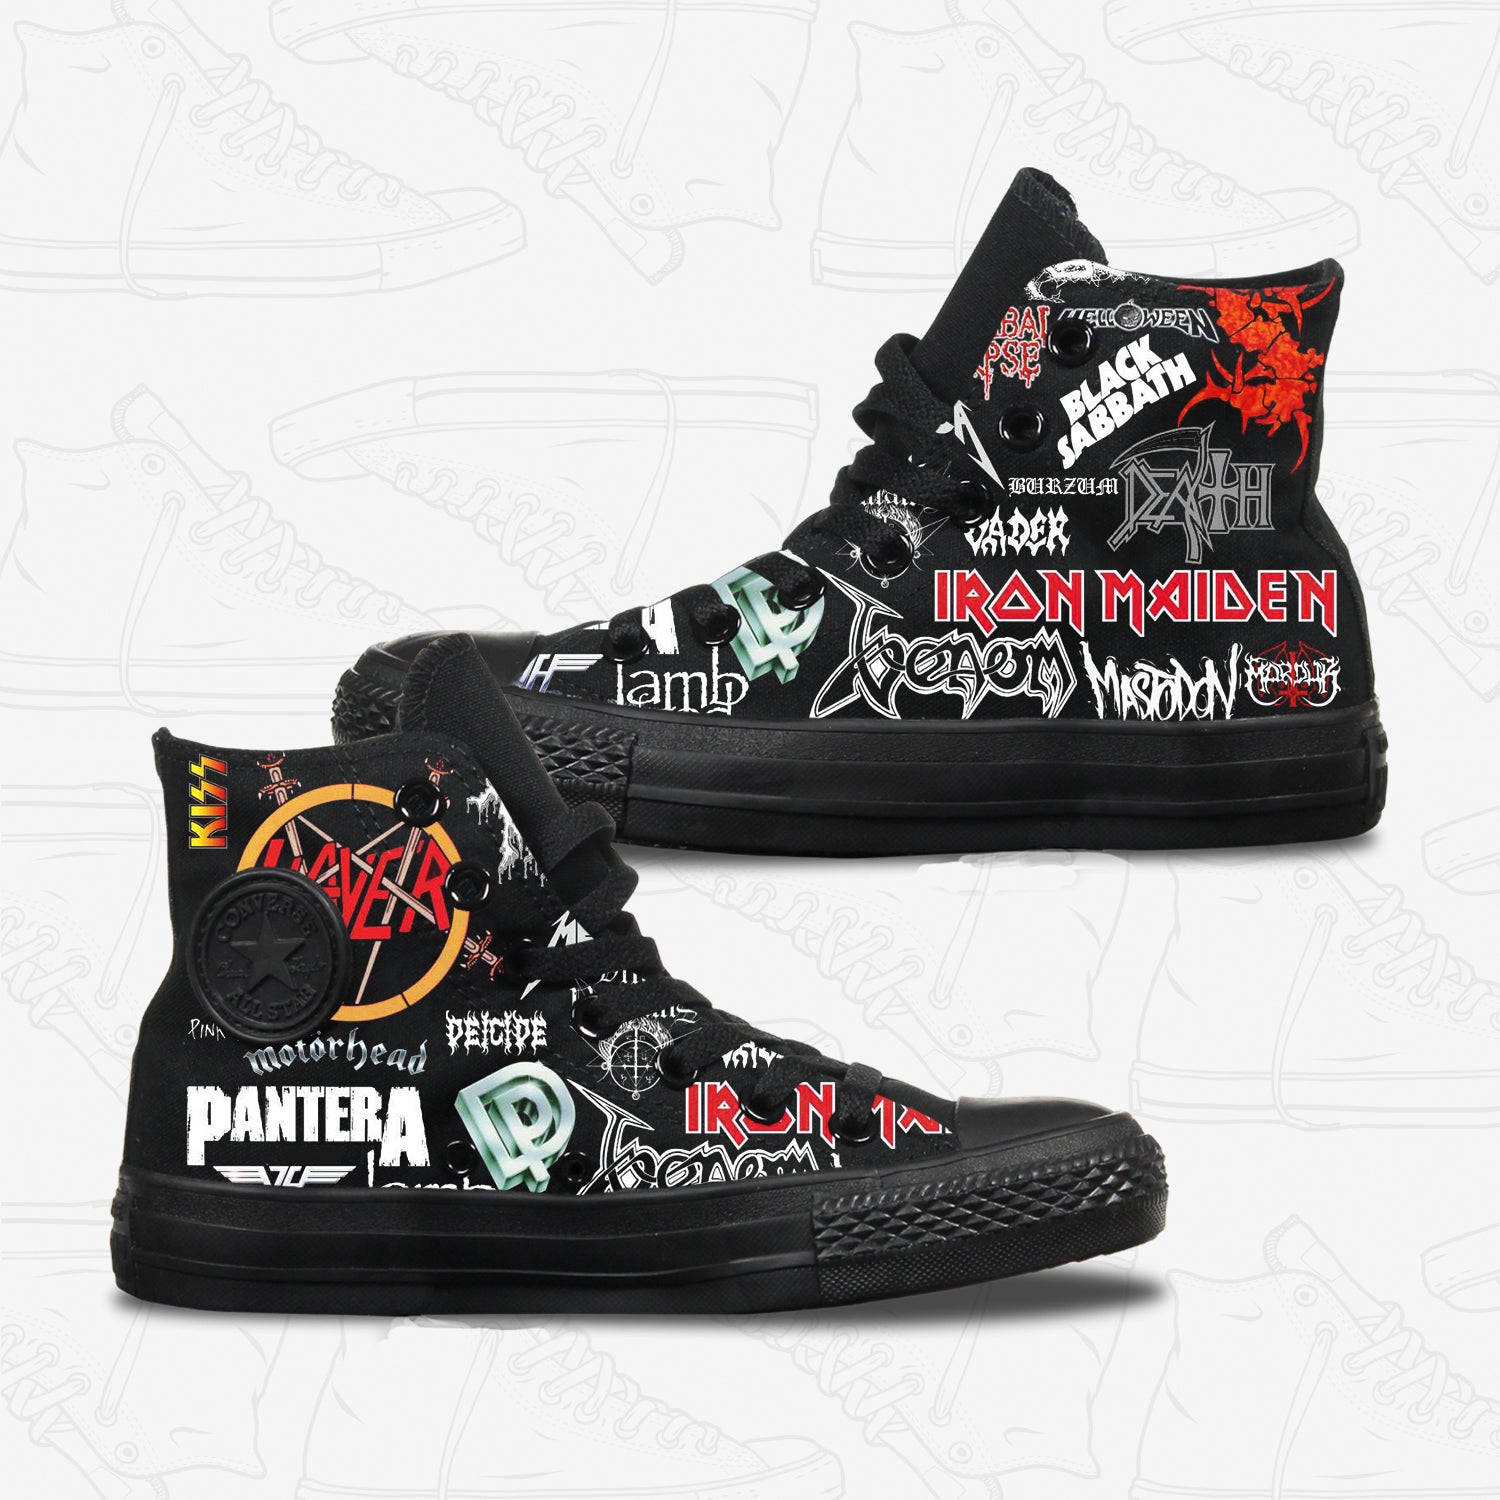 Iconic Rock Bands Adult Converse Shoes